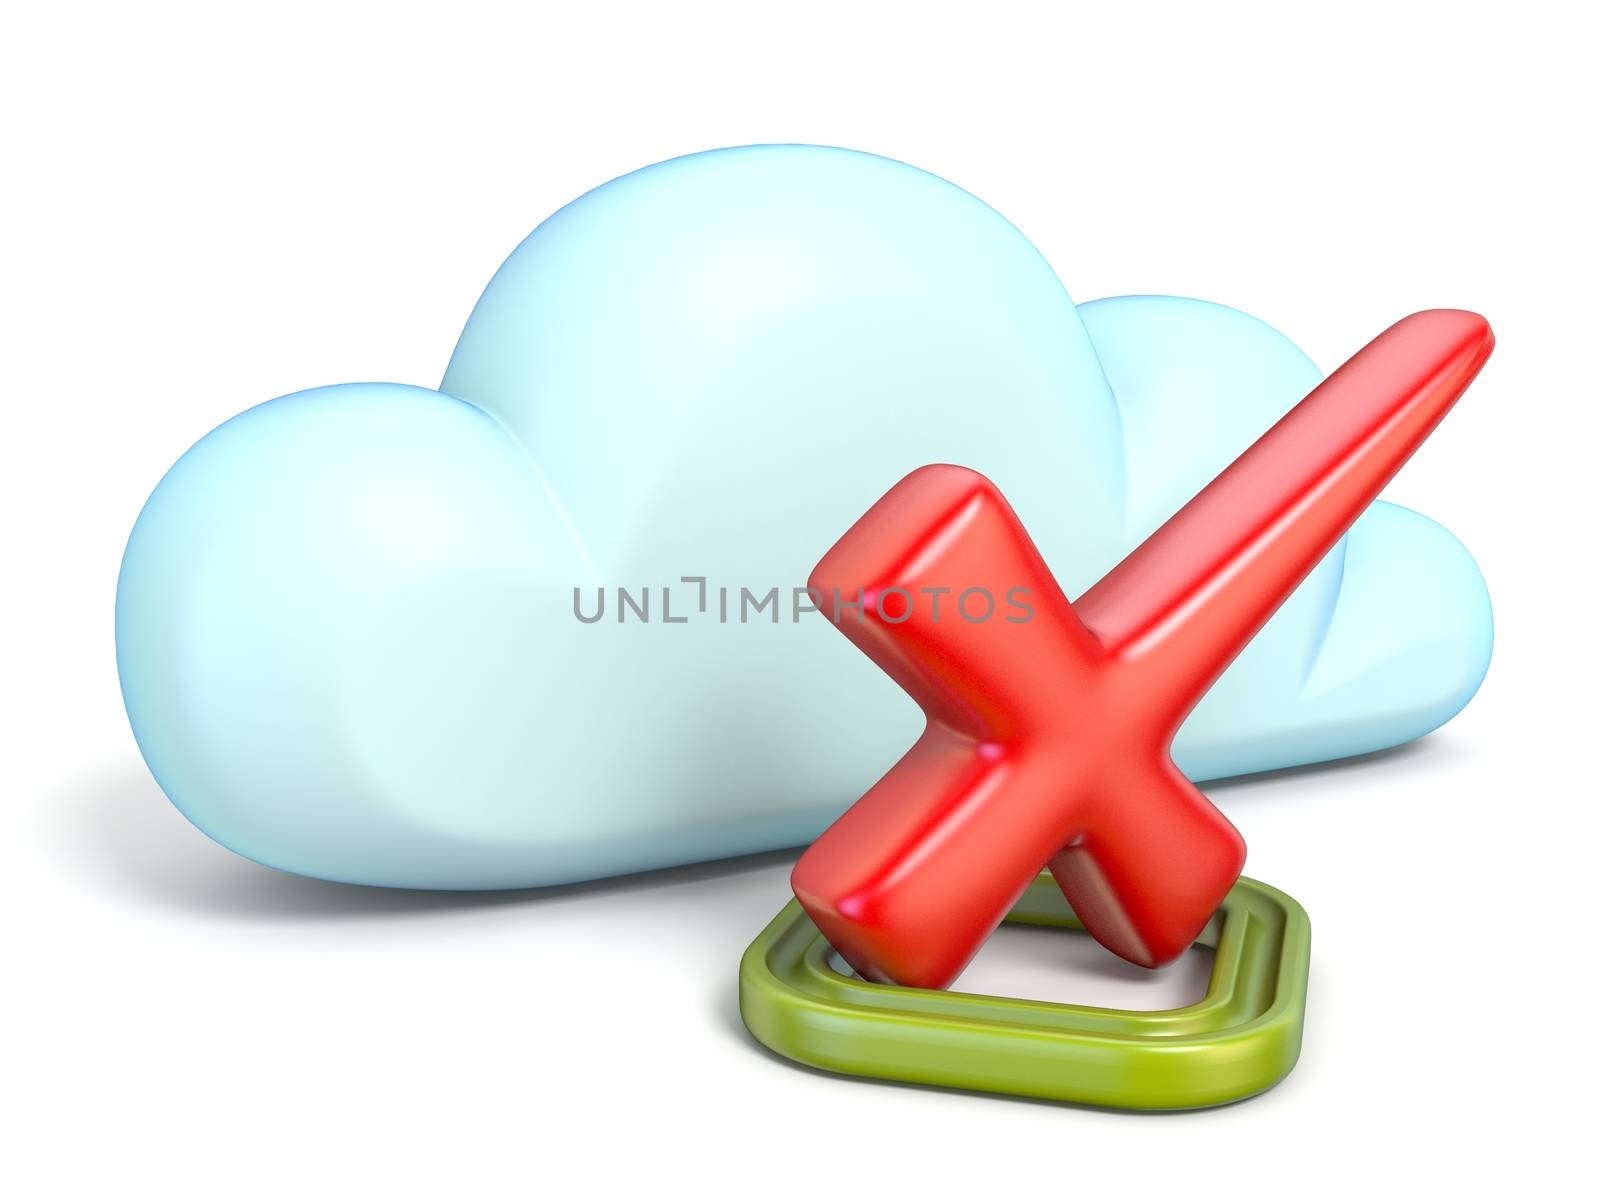 Cloud icon with red check mark 3D rendering isolated on white background